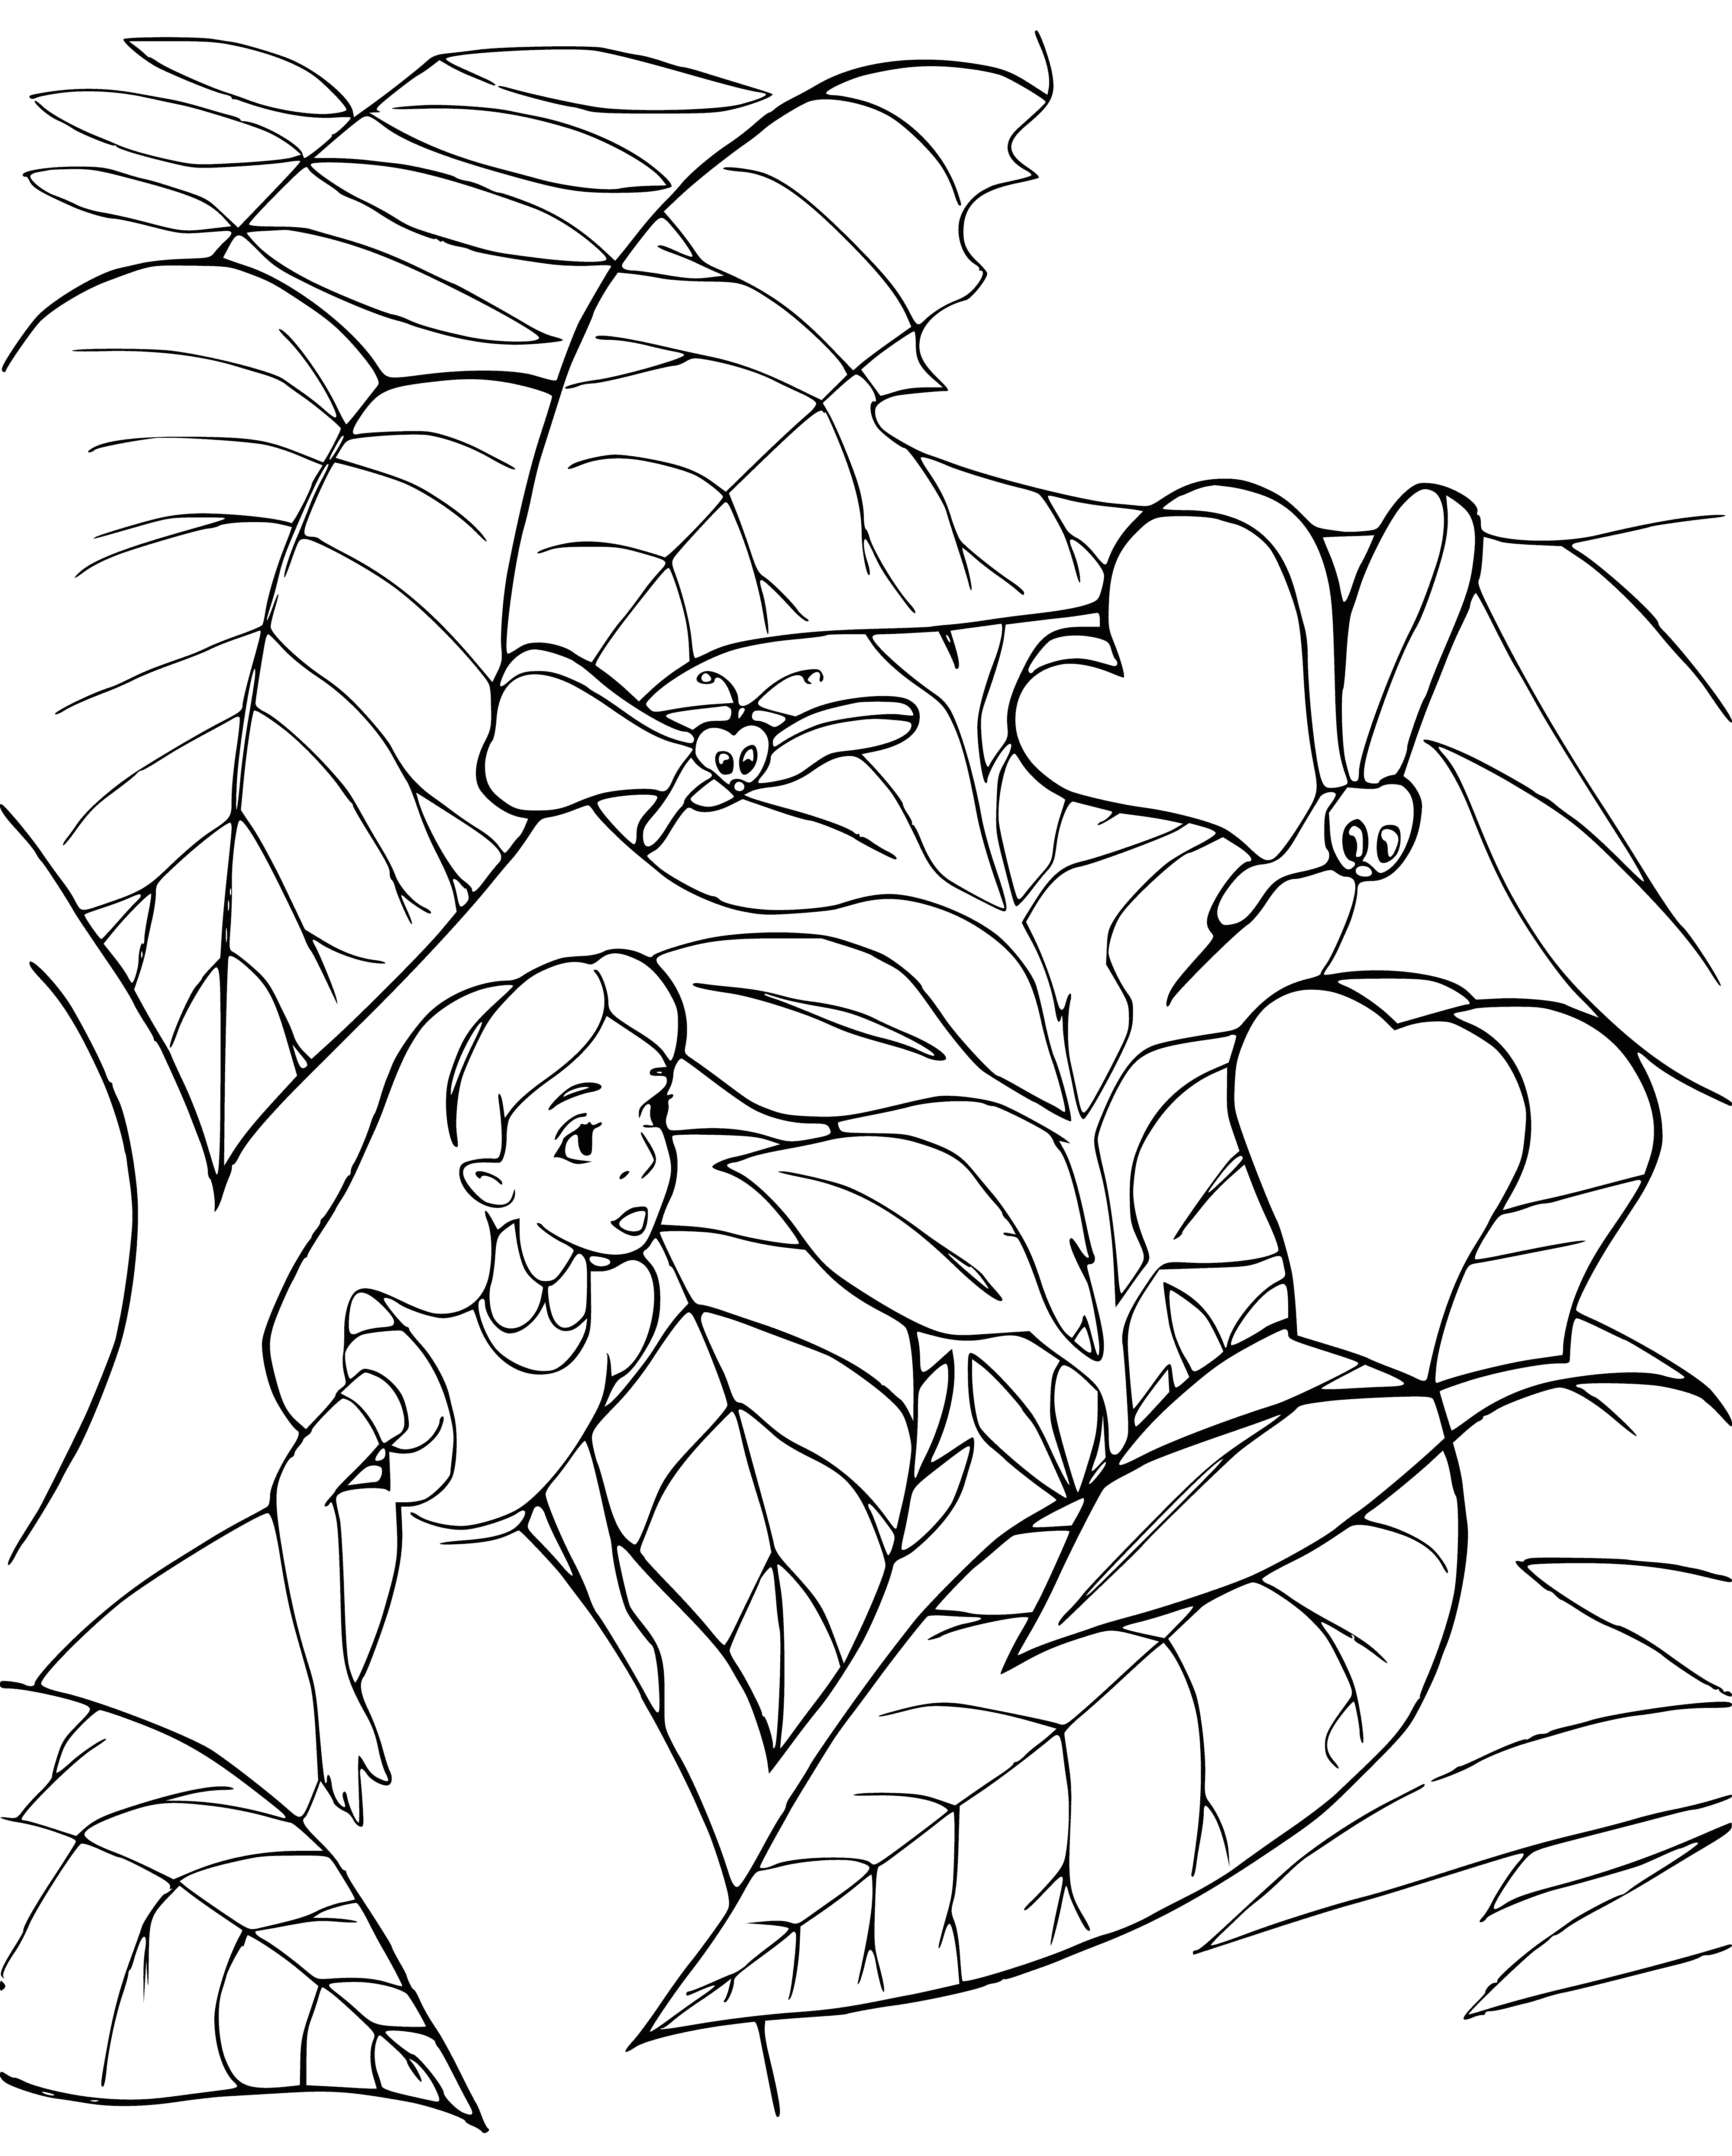 coloring page: Blond Alice in a blue dress & white apron holds a book, appearing to be lost in the story.